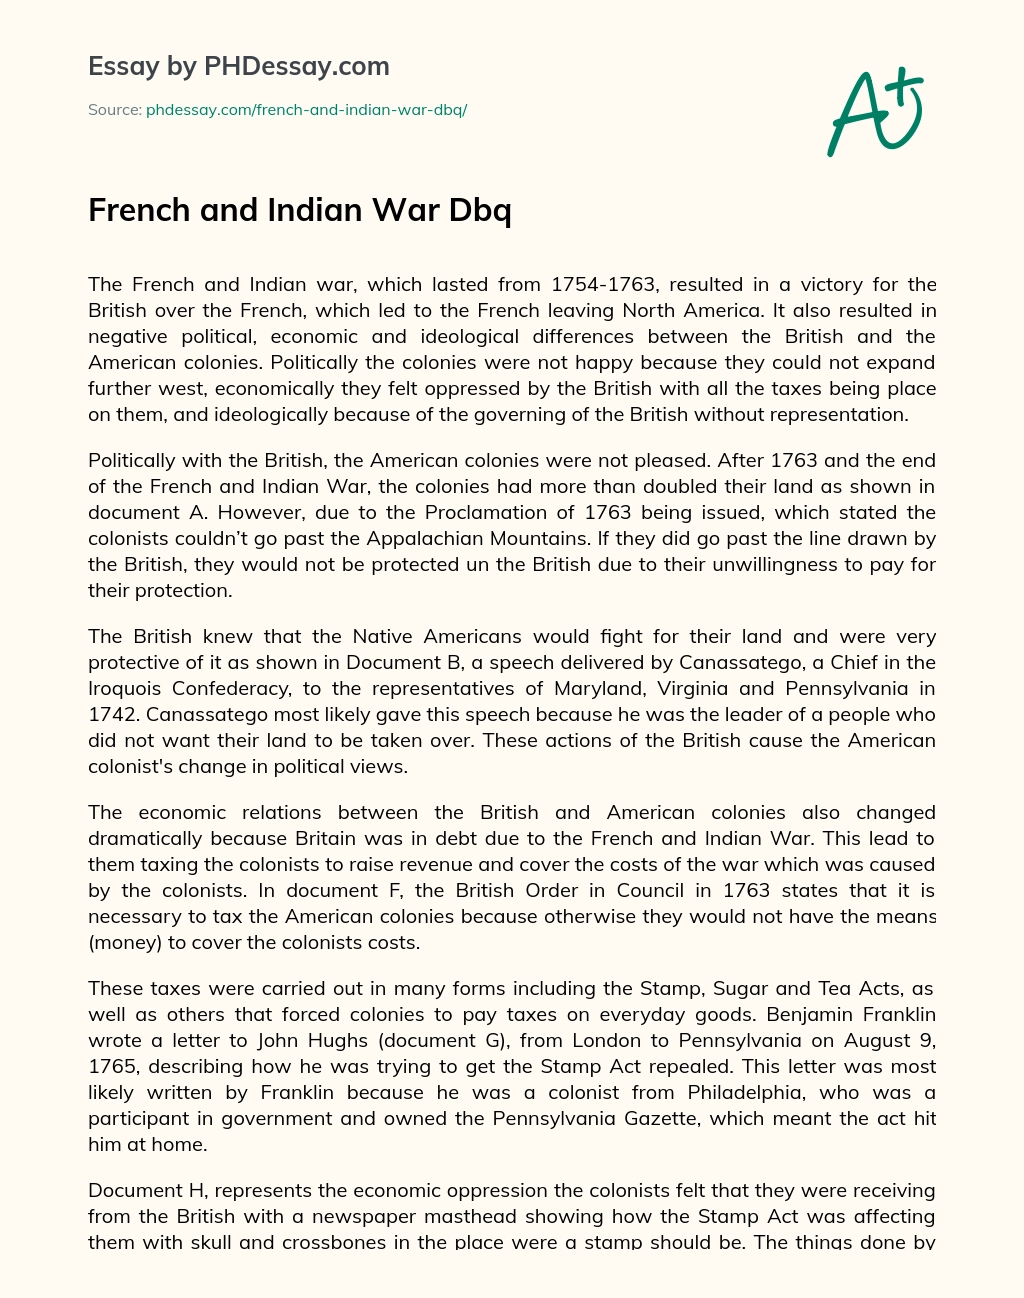 French and Indian War Dbq essay